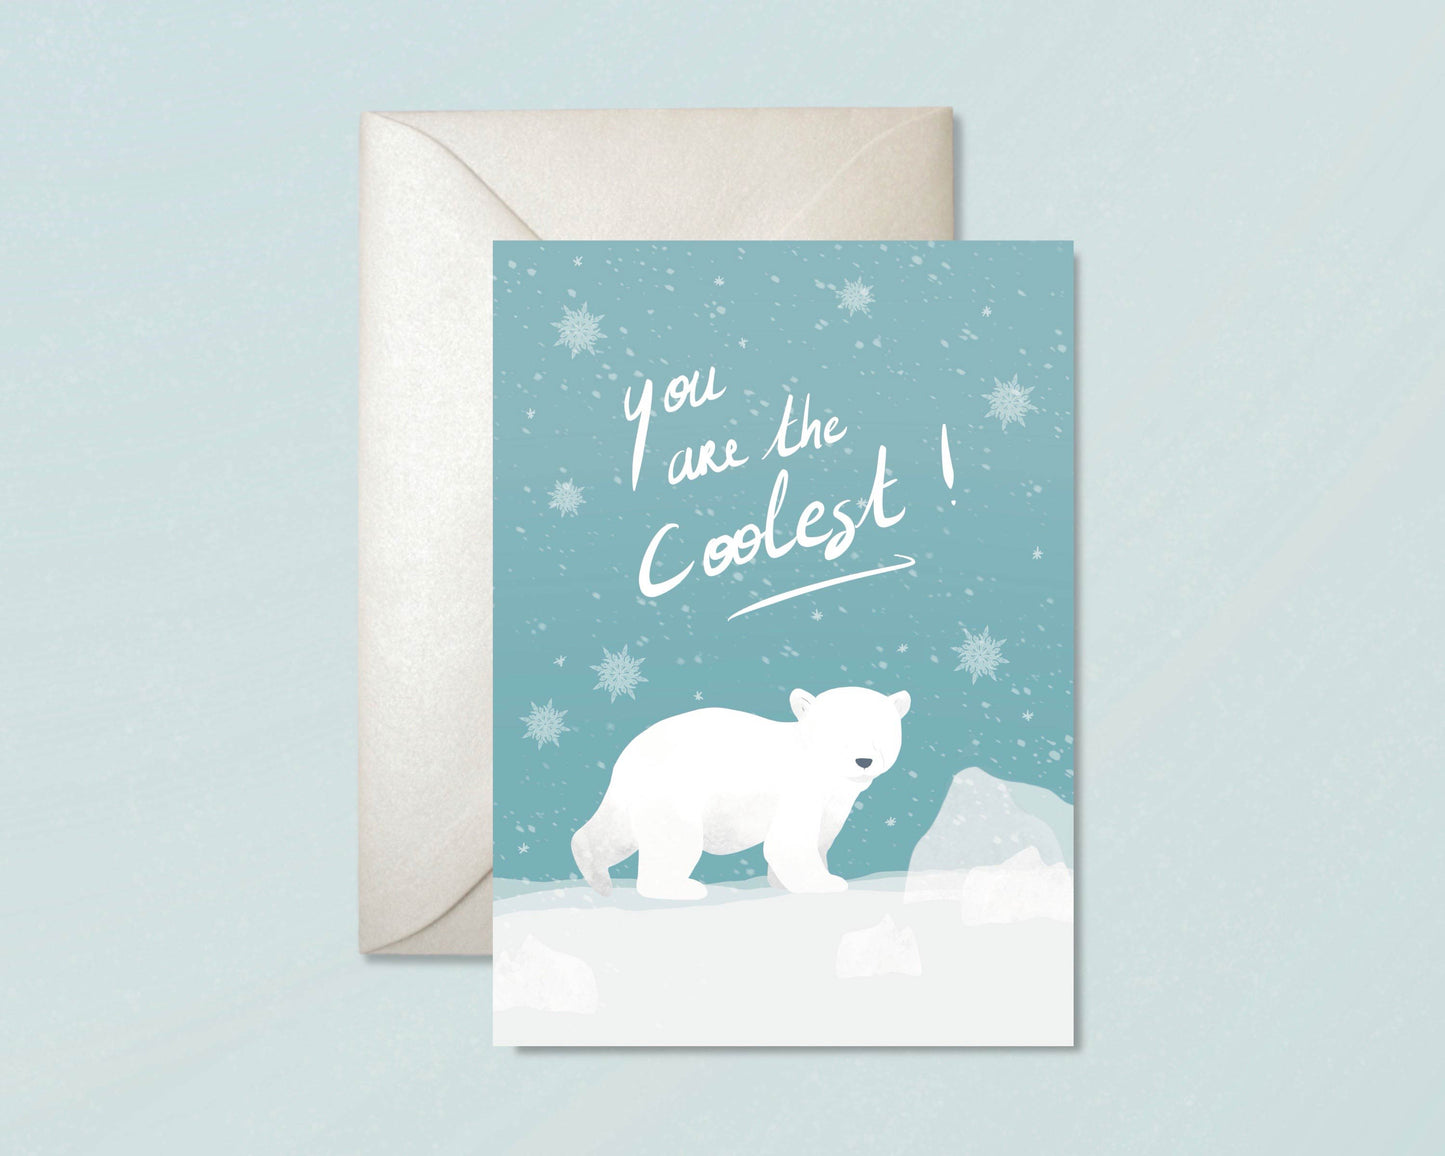 You Are The Coolest Card Greeting Cards - Honeypress Design